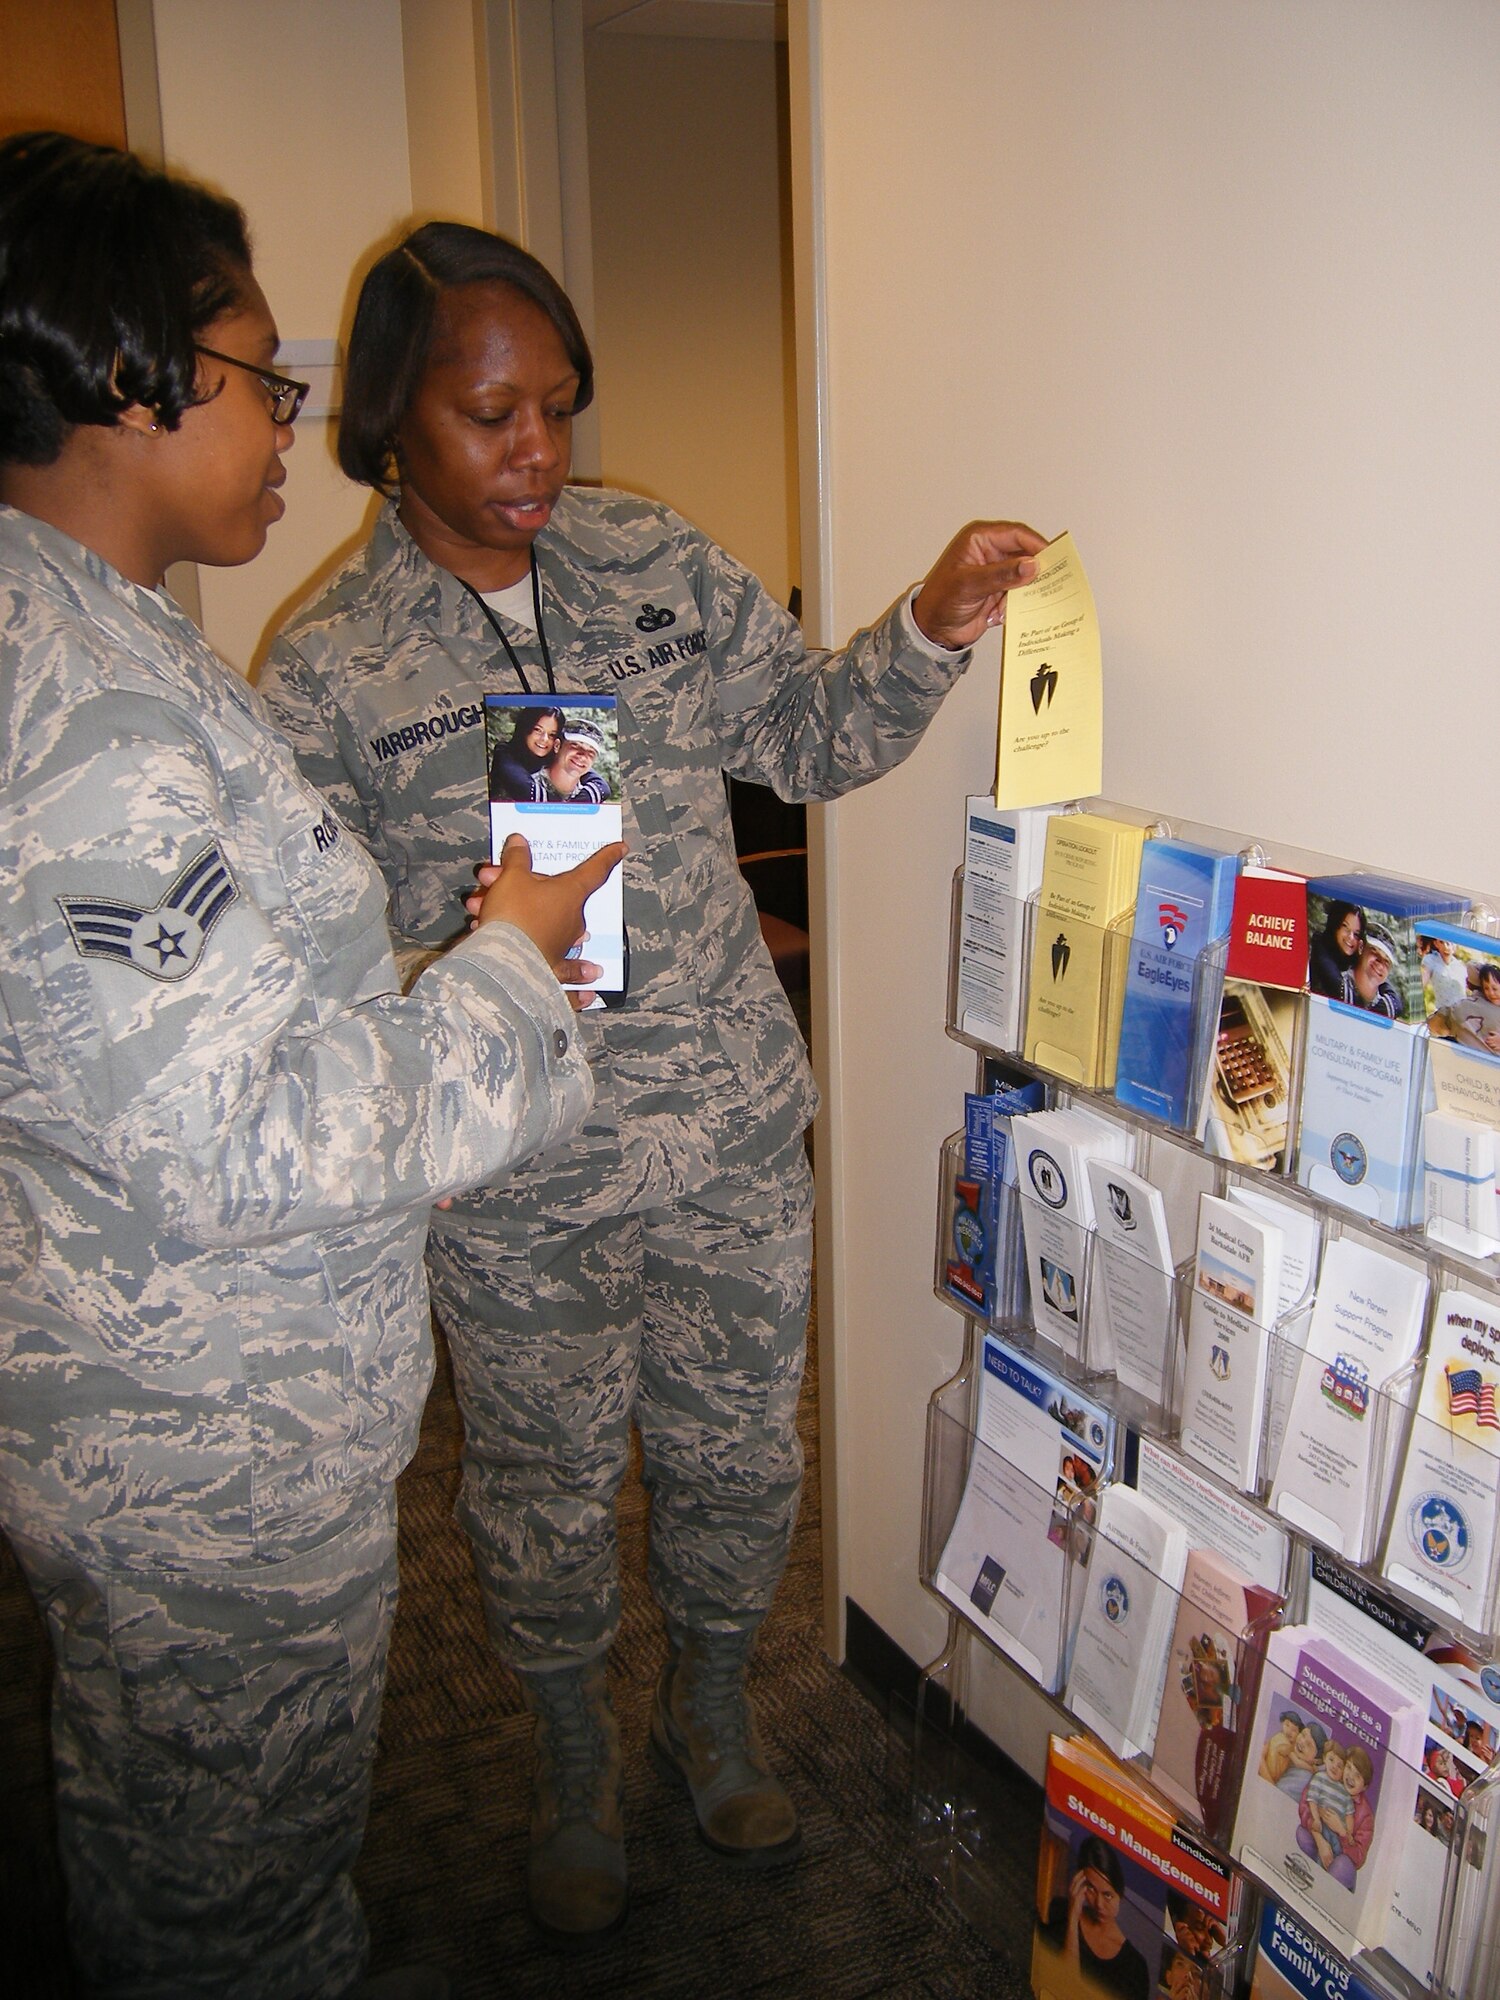 BARKSDALE AIR FORCE BASE, La. – Master Sgt. Keisha Yarbrough shows a Barksdale Airman information on the different agencies on base. Sergeant Yarbrough was recently honored as the 2009 Air Force Global Strike Command First Sergeant and Outstanding Airman of the Year.  (Courtesy Photo)